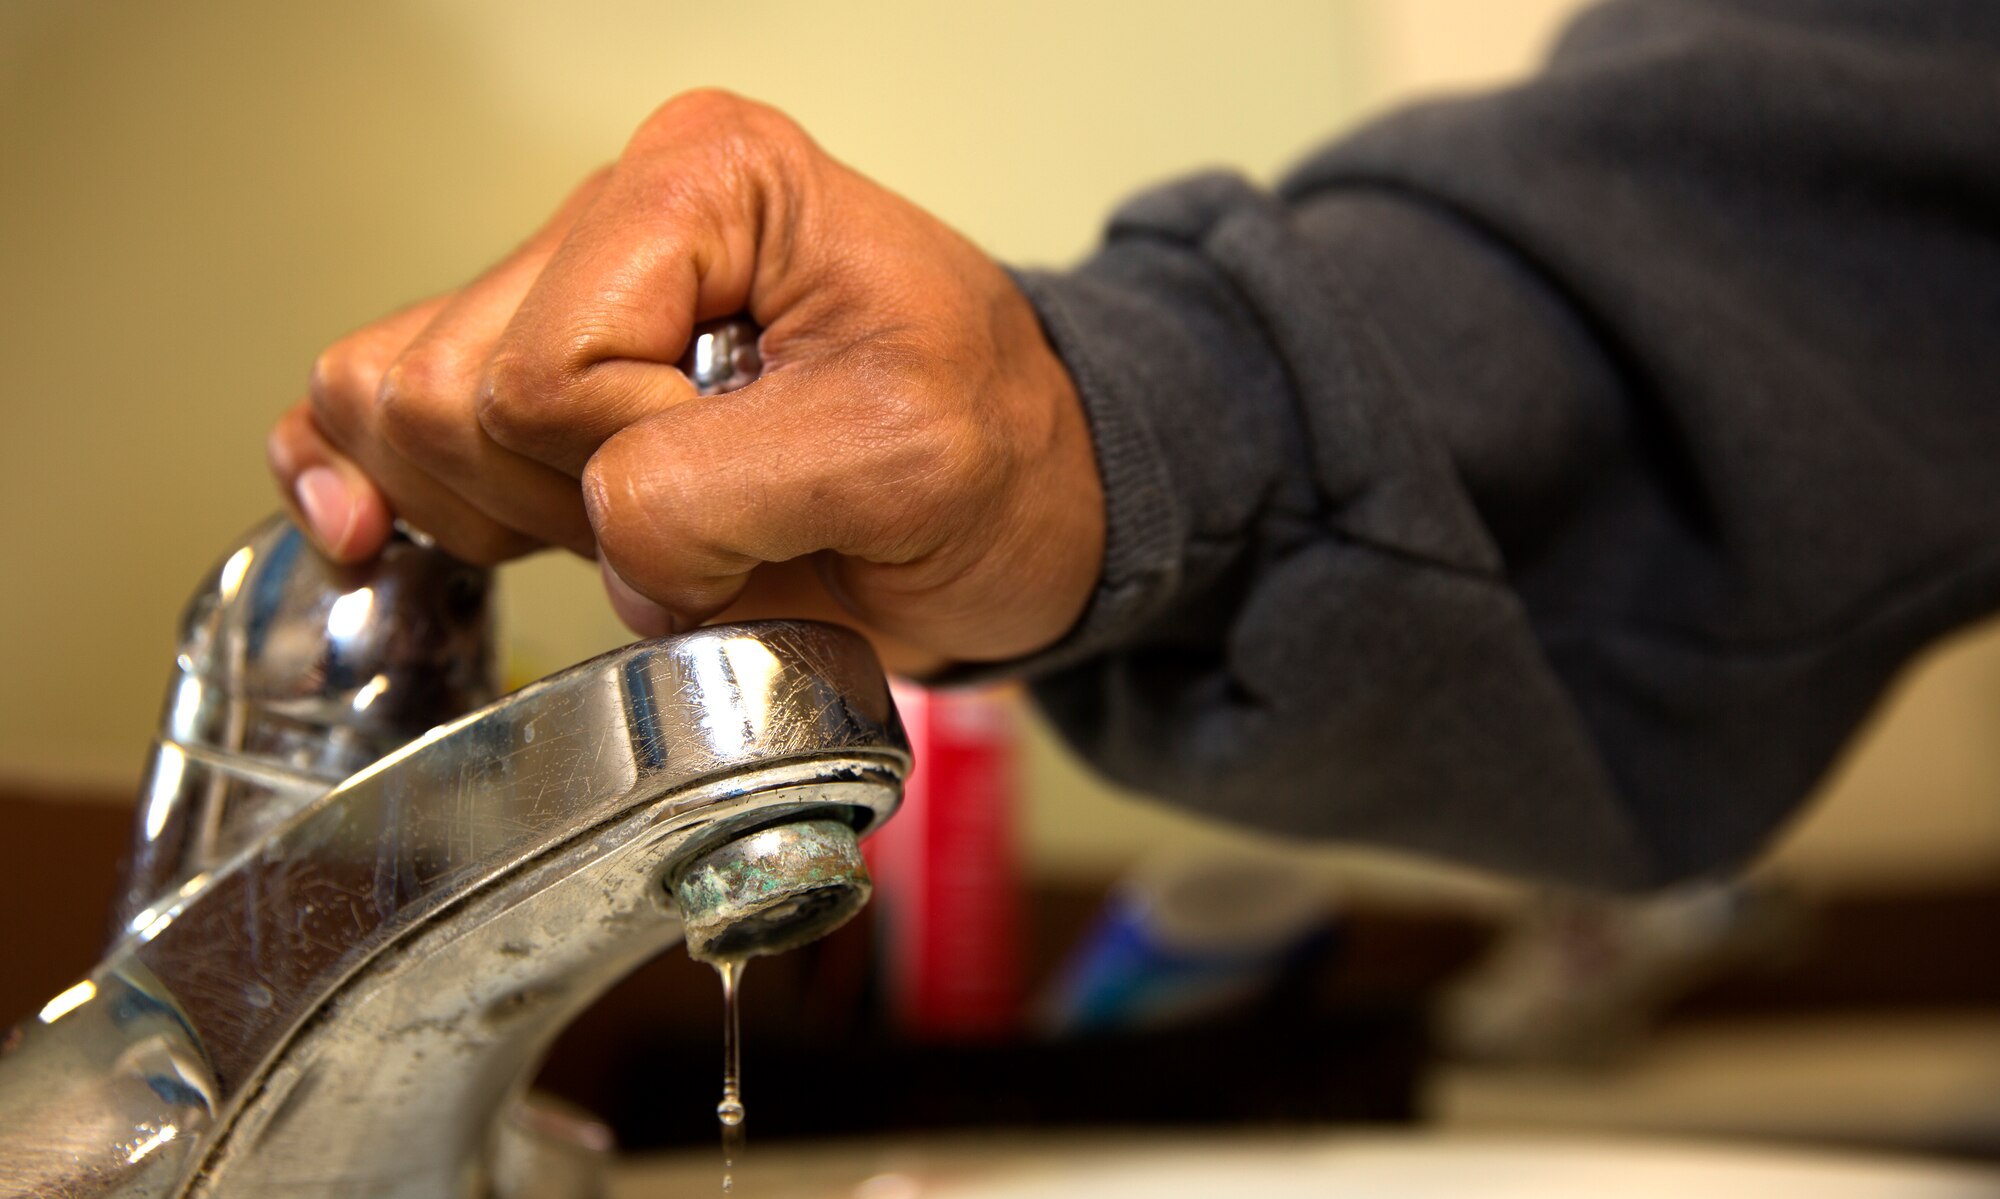 A Marine turns off the faucet while preparing for work aboard Marine Corps Air Station Miramar, Calif., May 9. Marines, Sailors, families and civilians working and living aboard the air station take part in fighting the drought in California by cutting their water usage wherever they can.